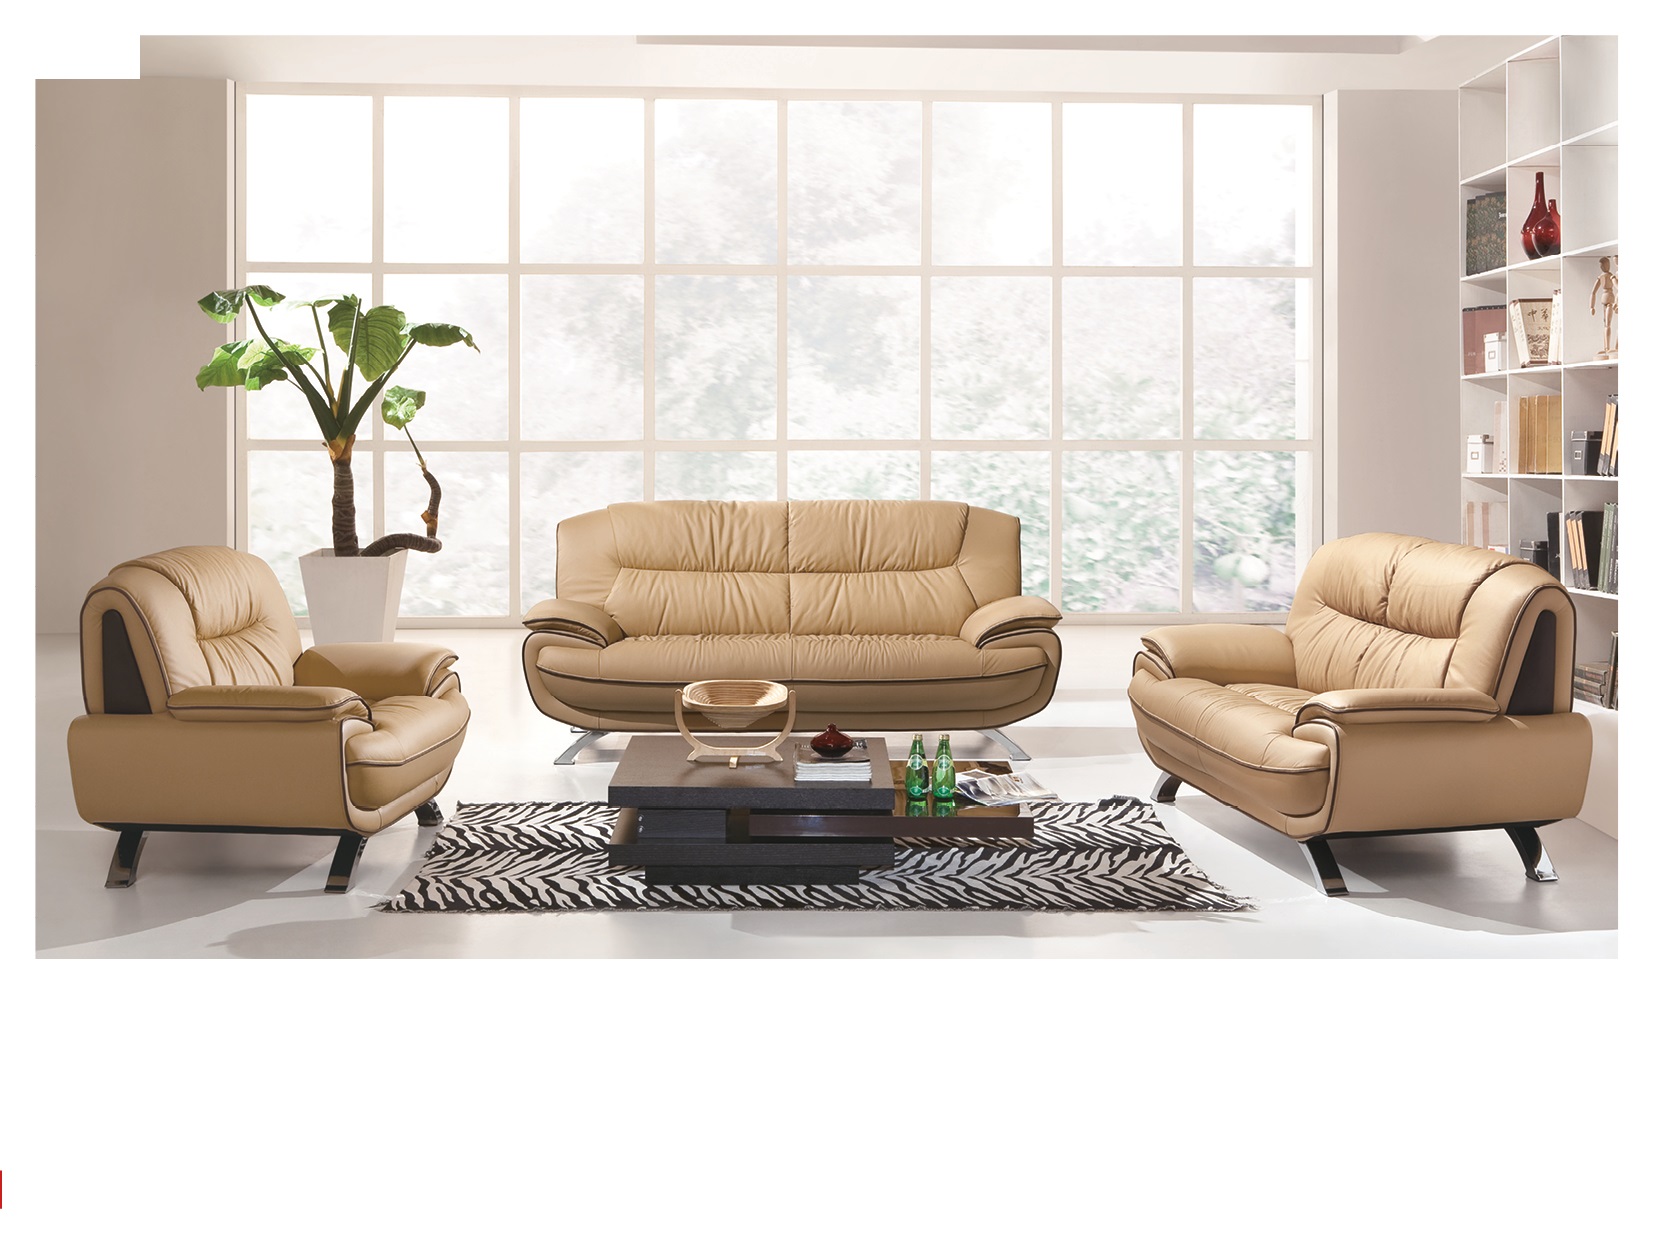 Living Room Furniture Sleepers Sofas Loveseats and Chairs 405 Beige/Brown